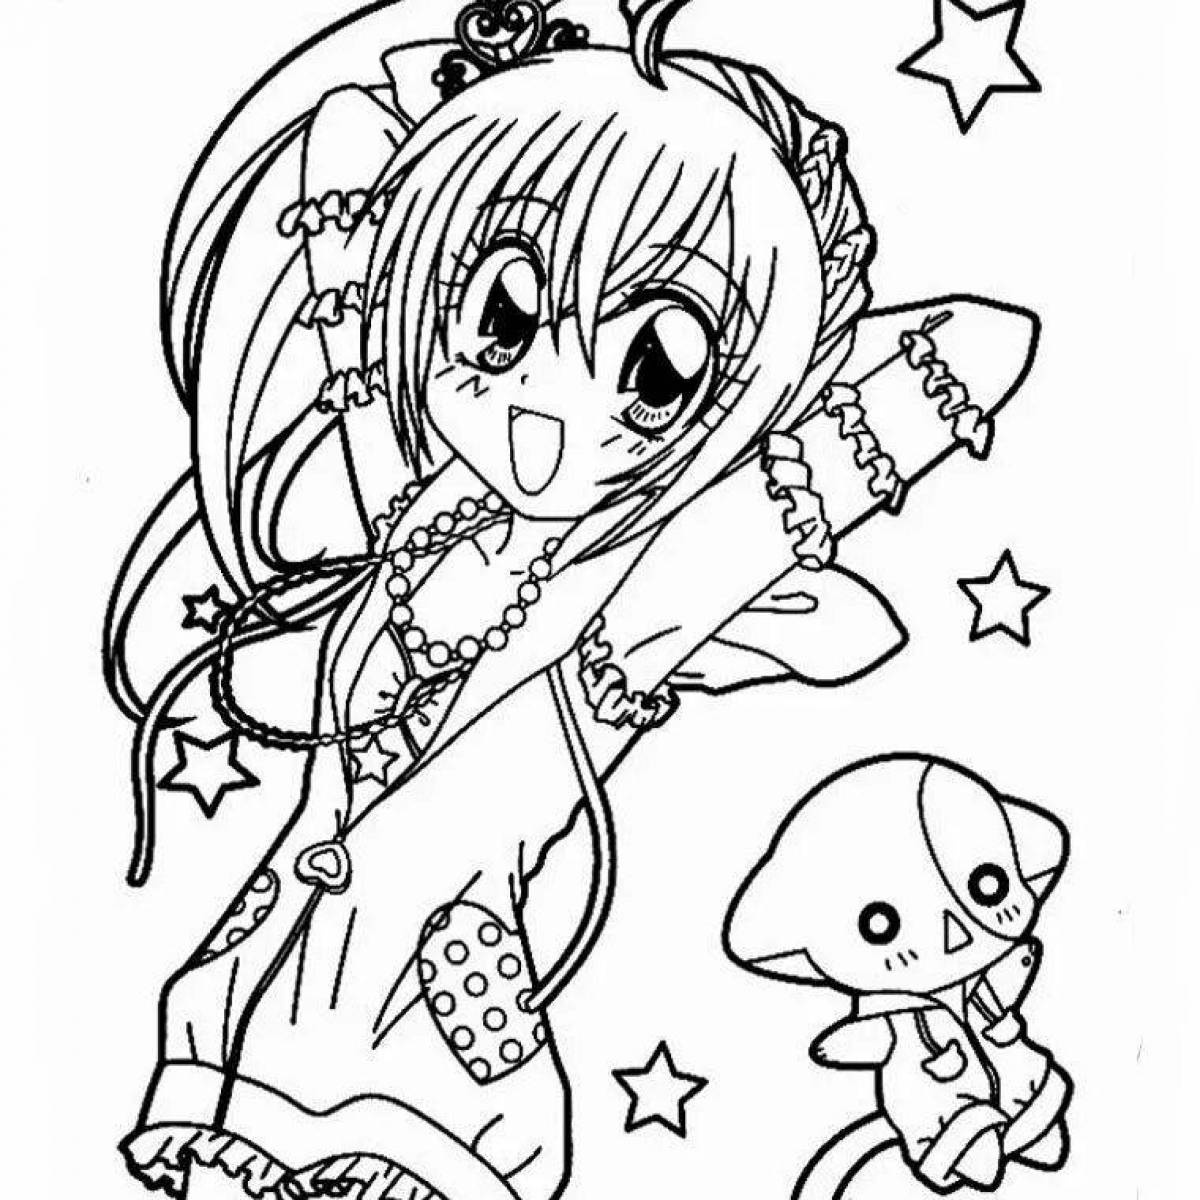 Delightful anime print coloring page